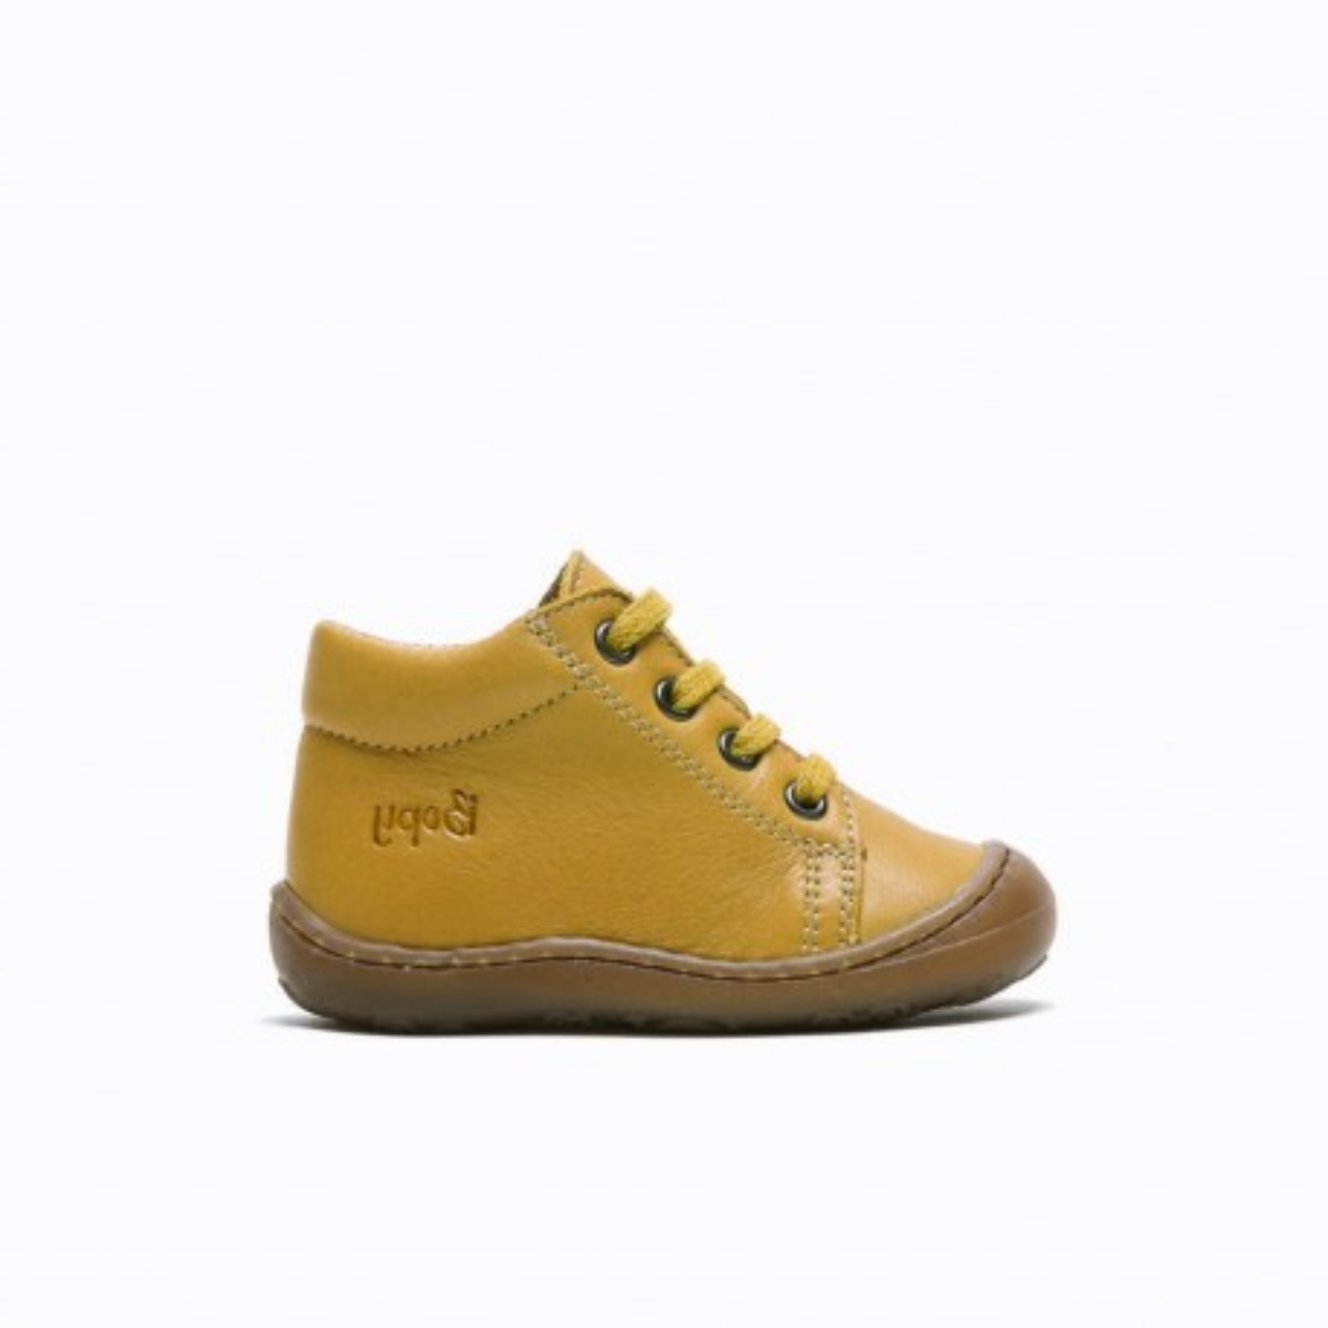 A boys ankle boot by Bopy ,style John, in yellow with lace up fastening. Left side view